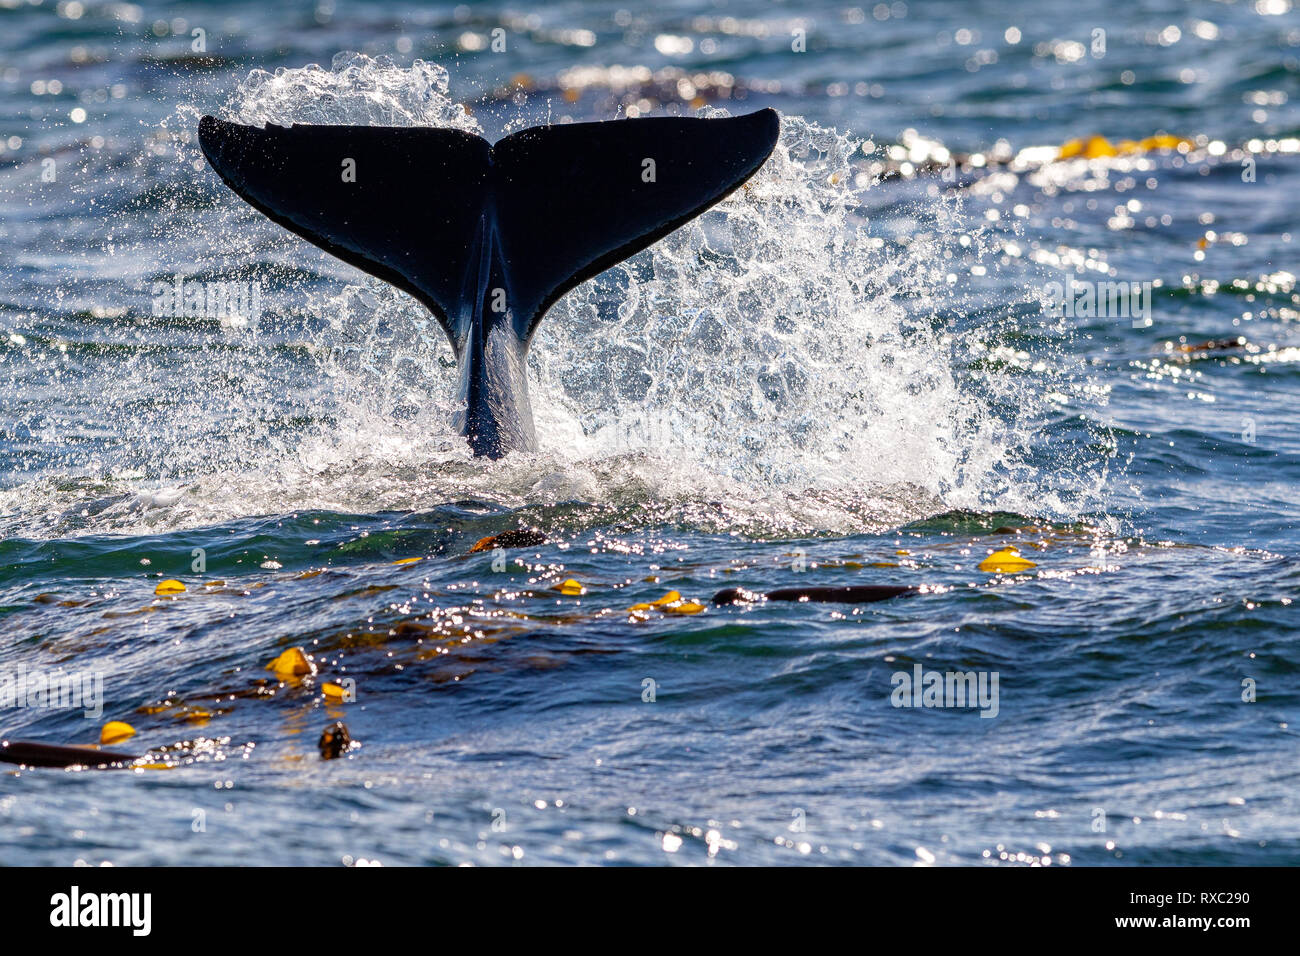 Northern resident killer whale spalshing with fluke near Lizard Point, Malcolm Island,  Vancouver Island, British Columbia, Canada Stock Photo